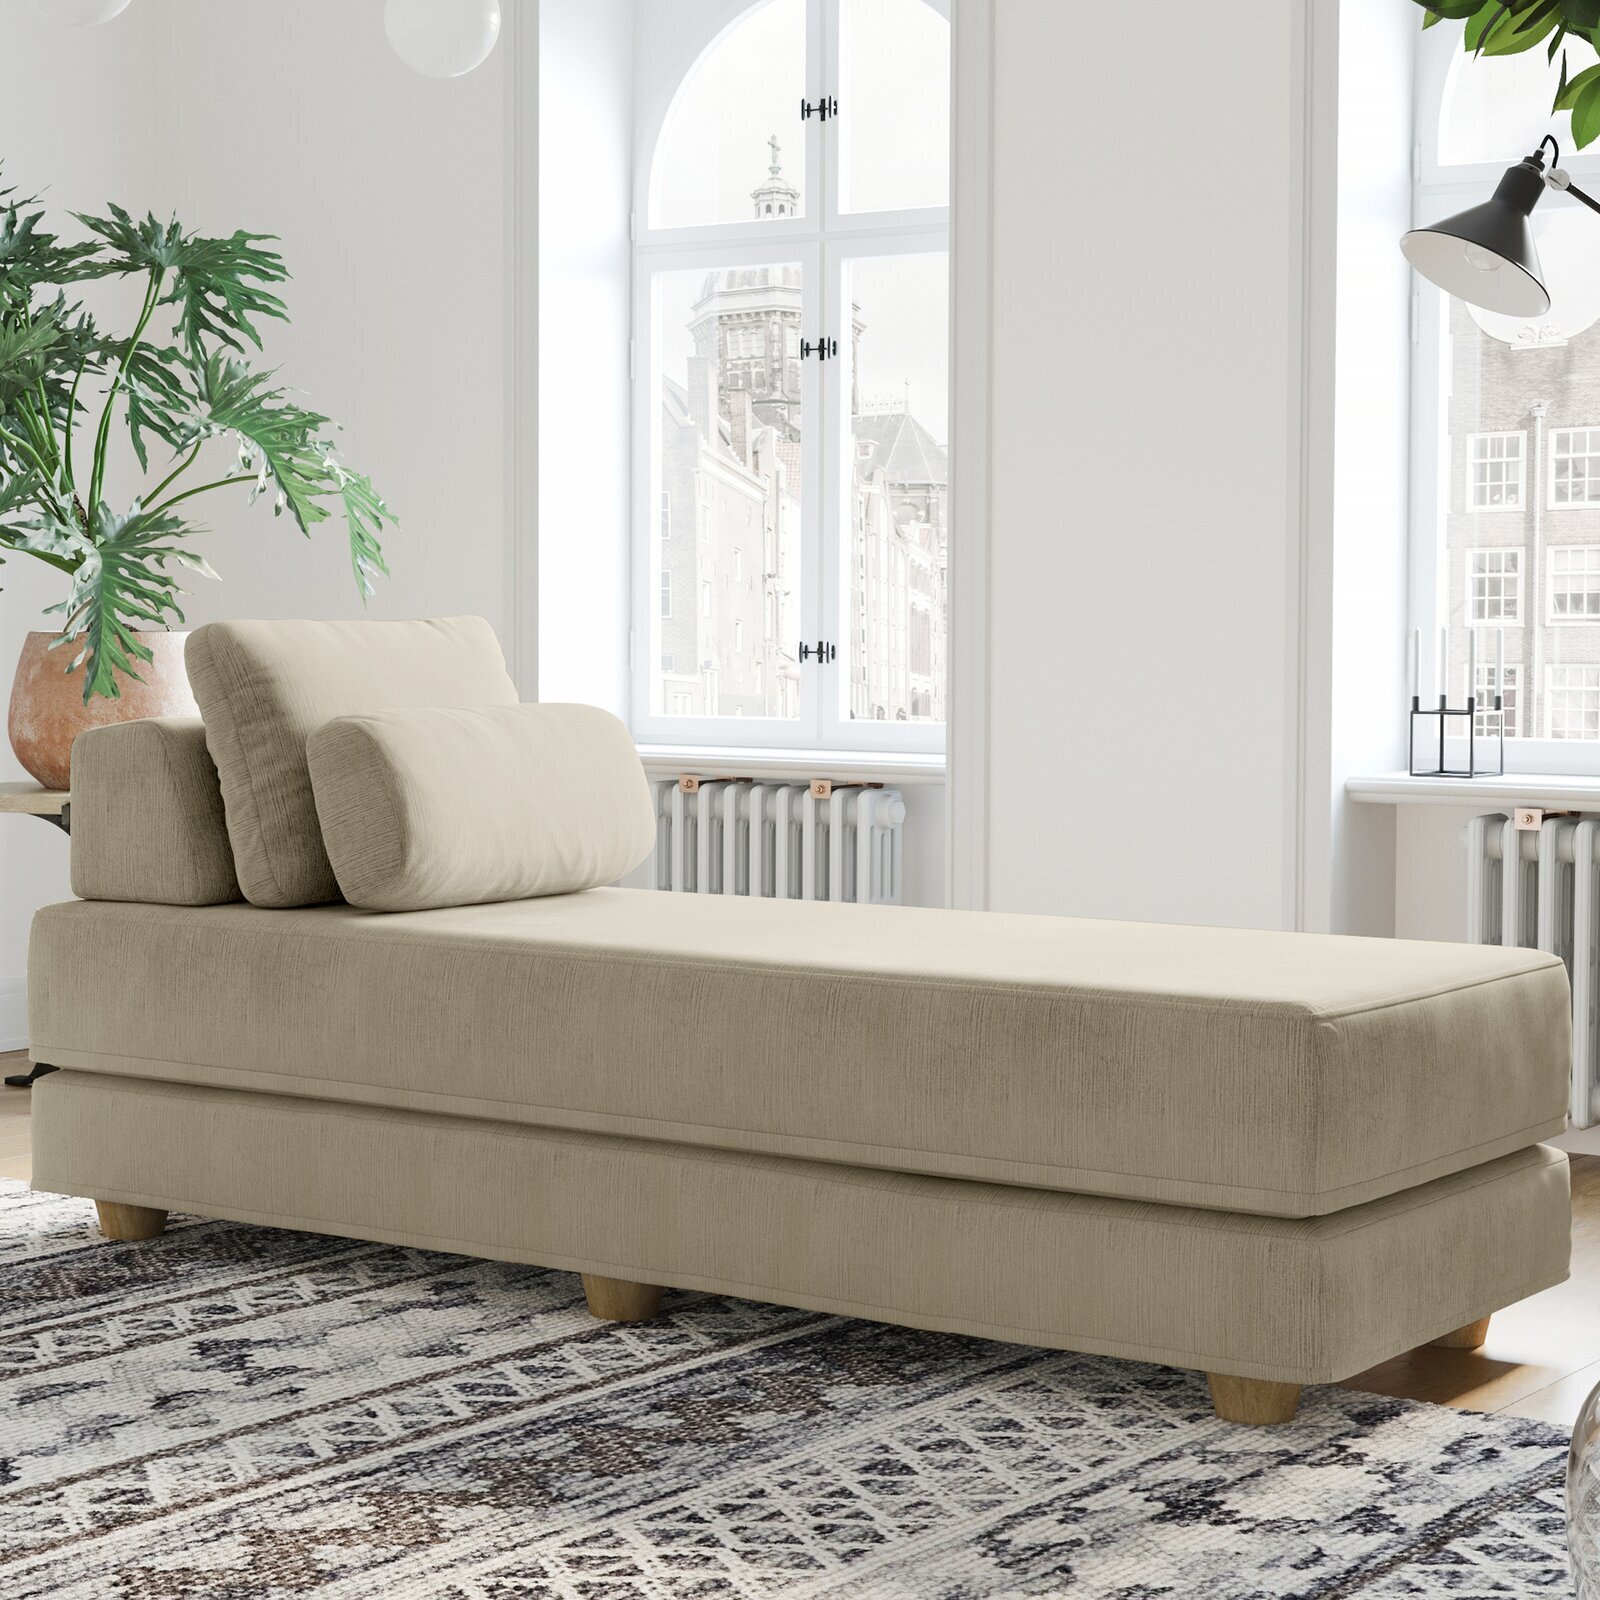 Queen Size Chaise Style Platform Daybed